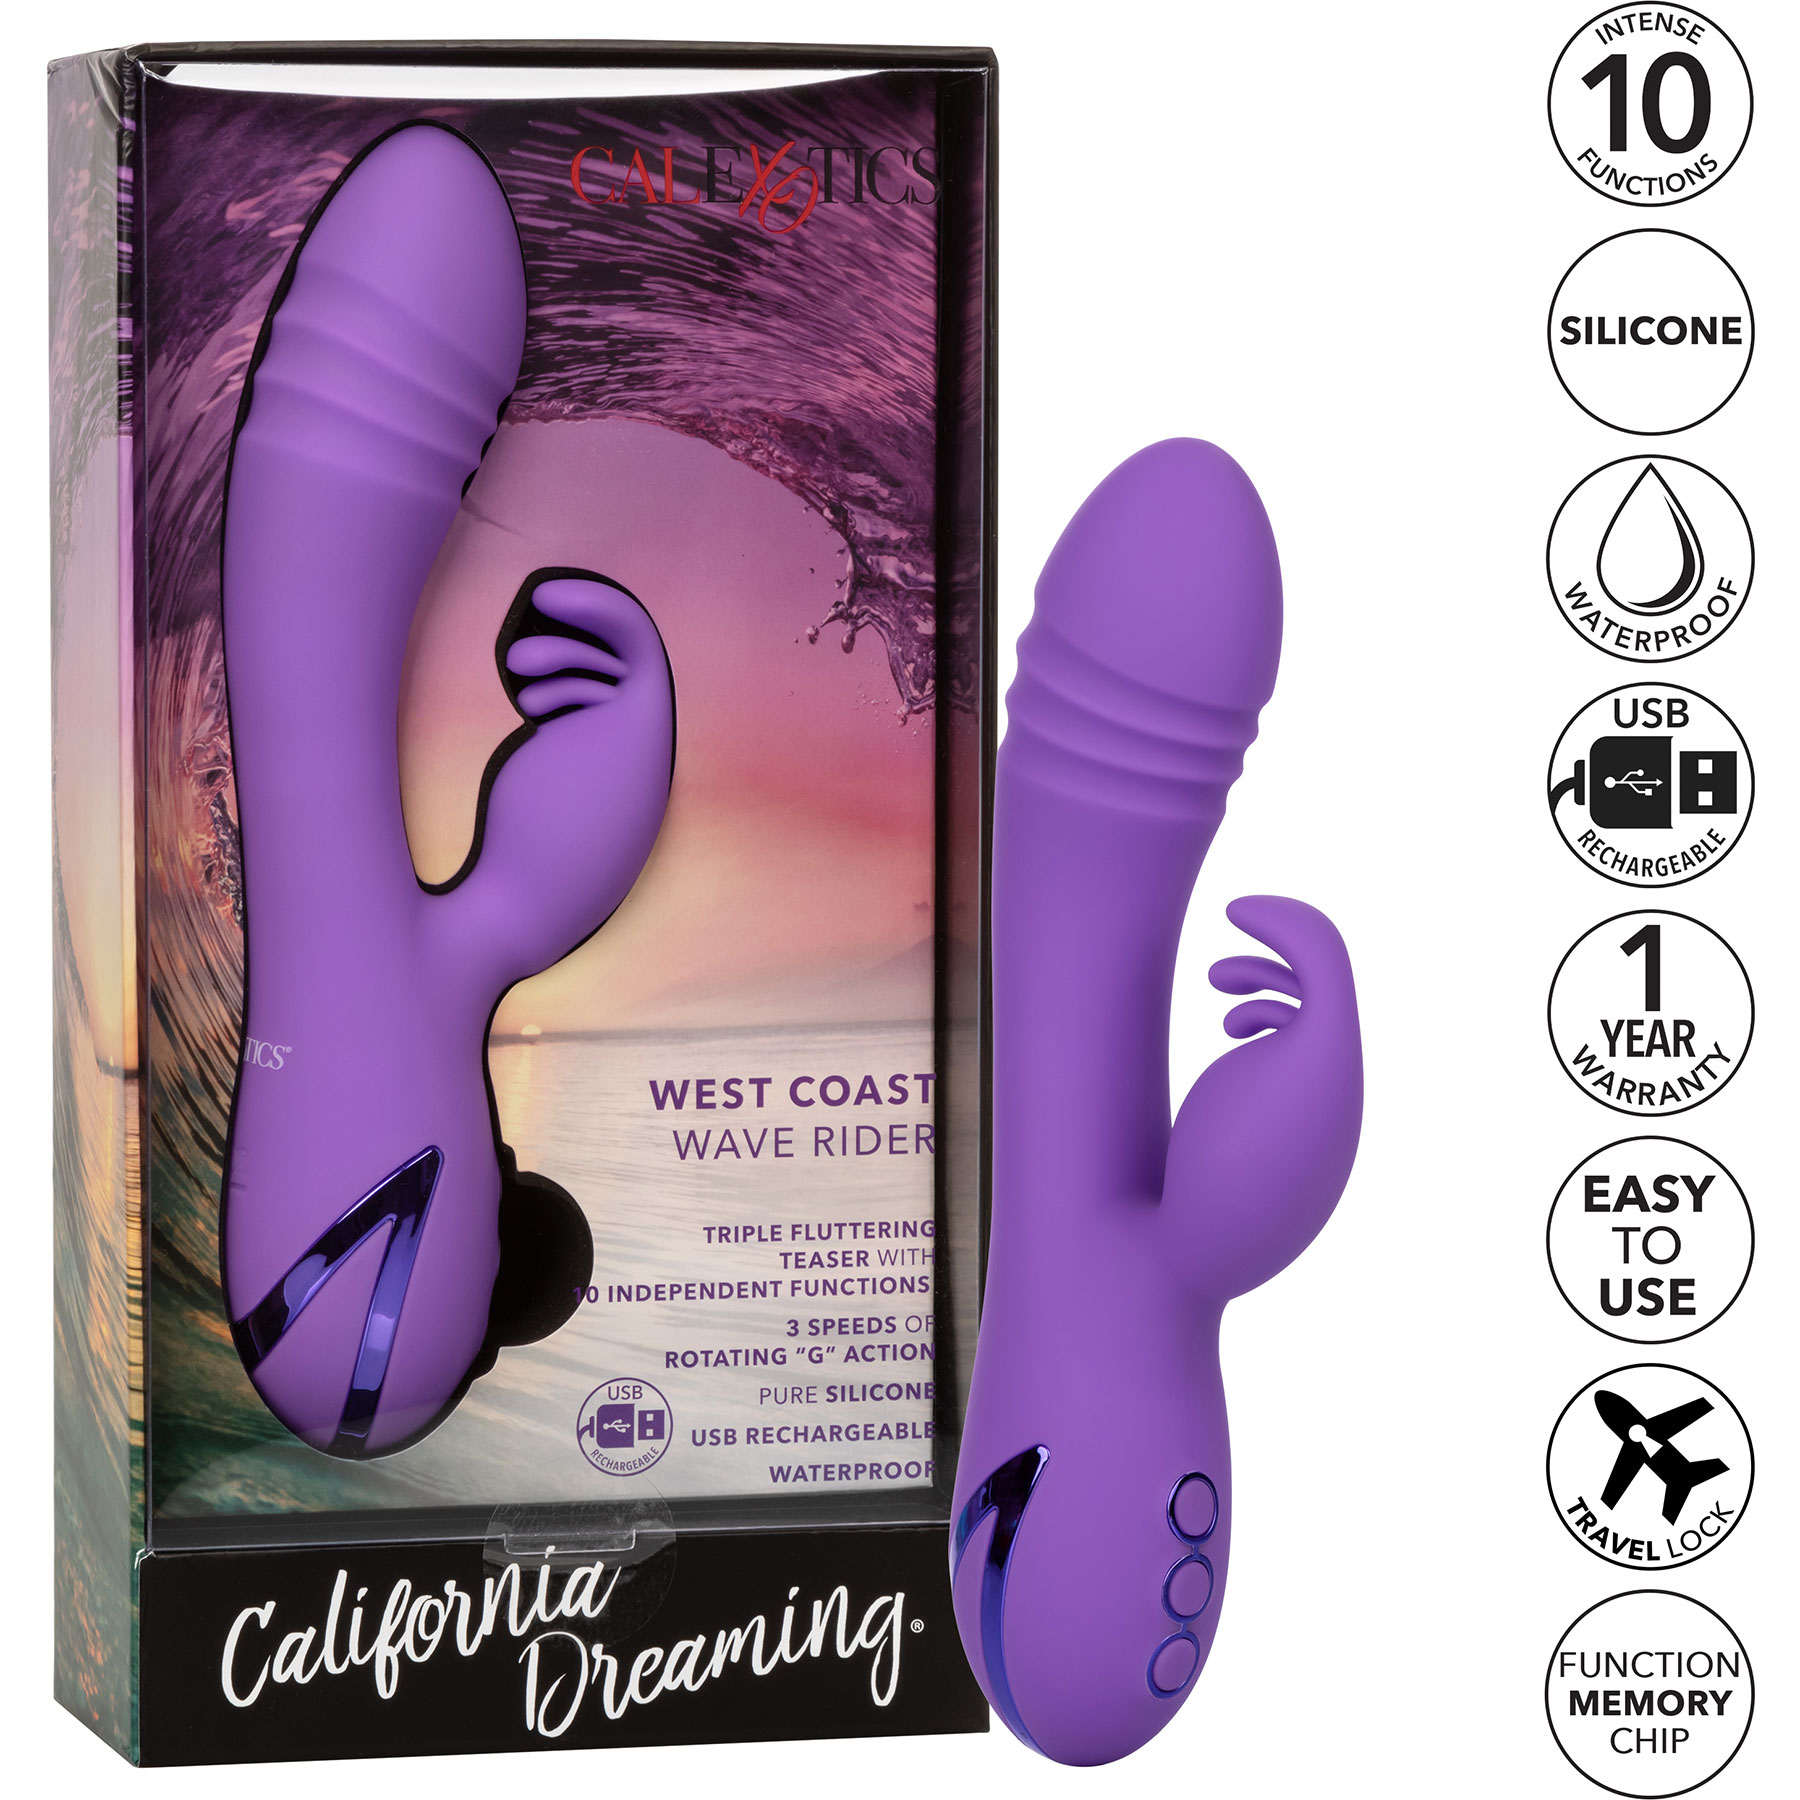 California Dreaming West Coast Wave Rider Rabbit Style Silicone Vibrator - Features